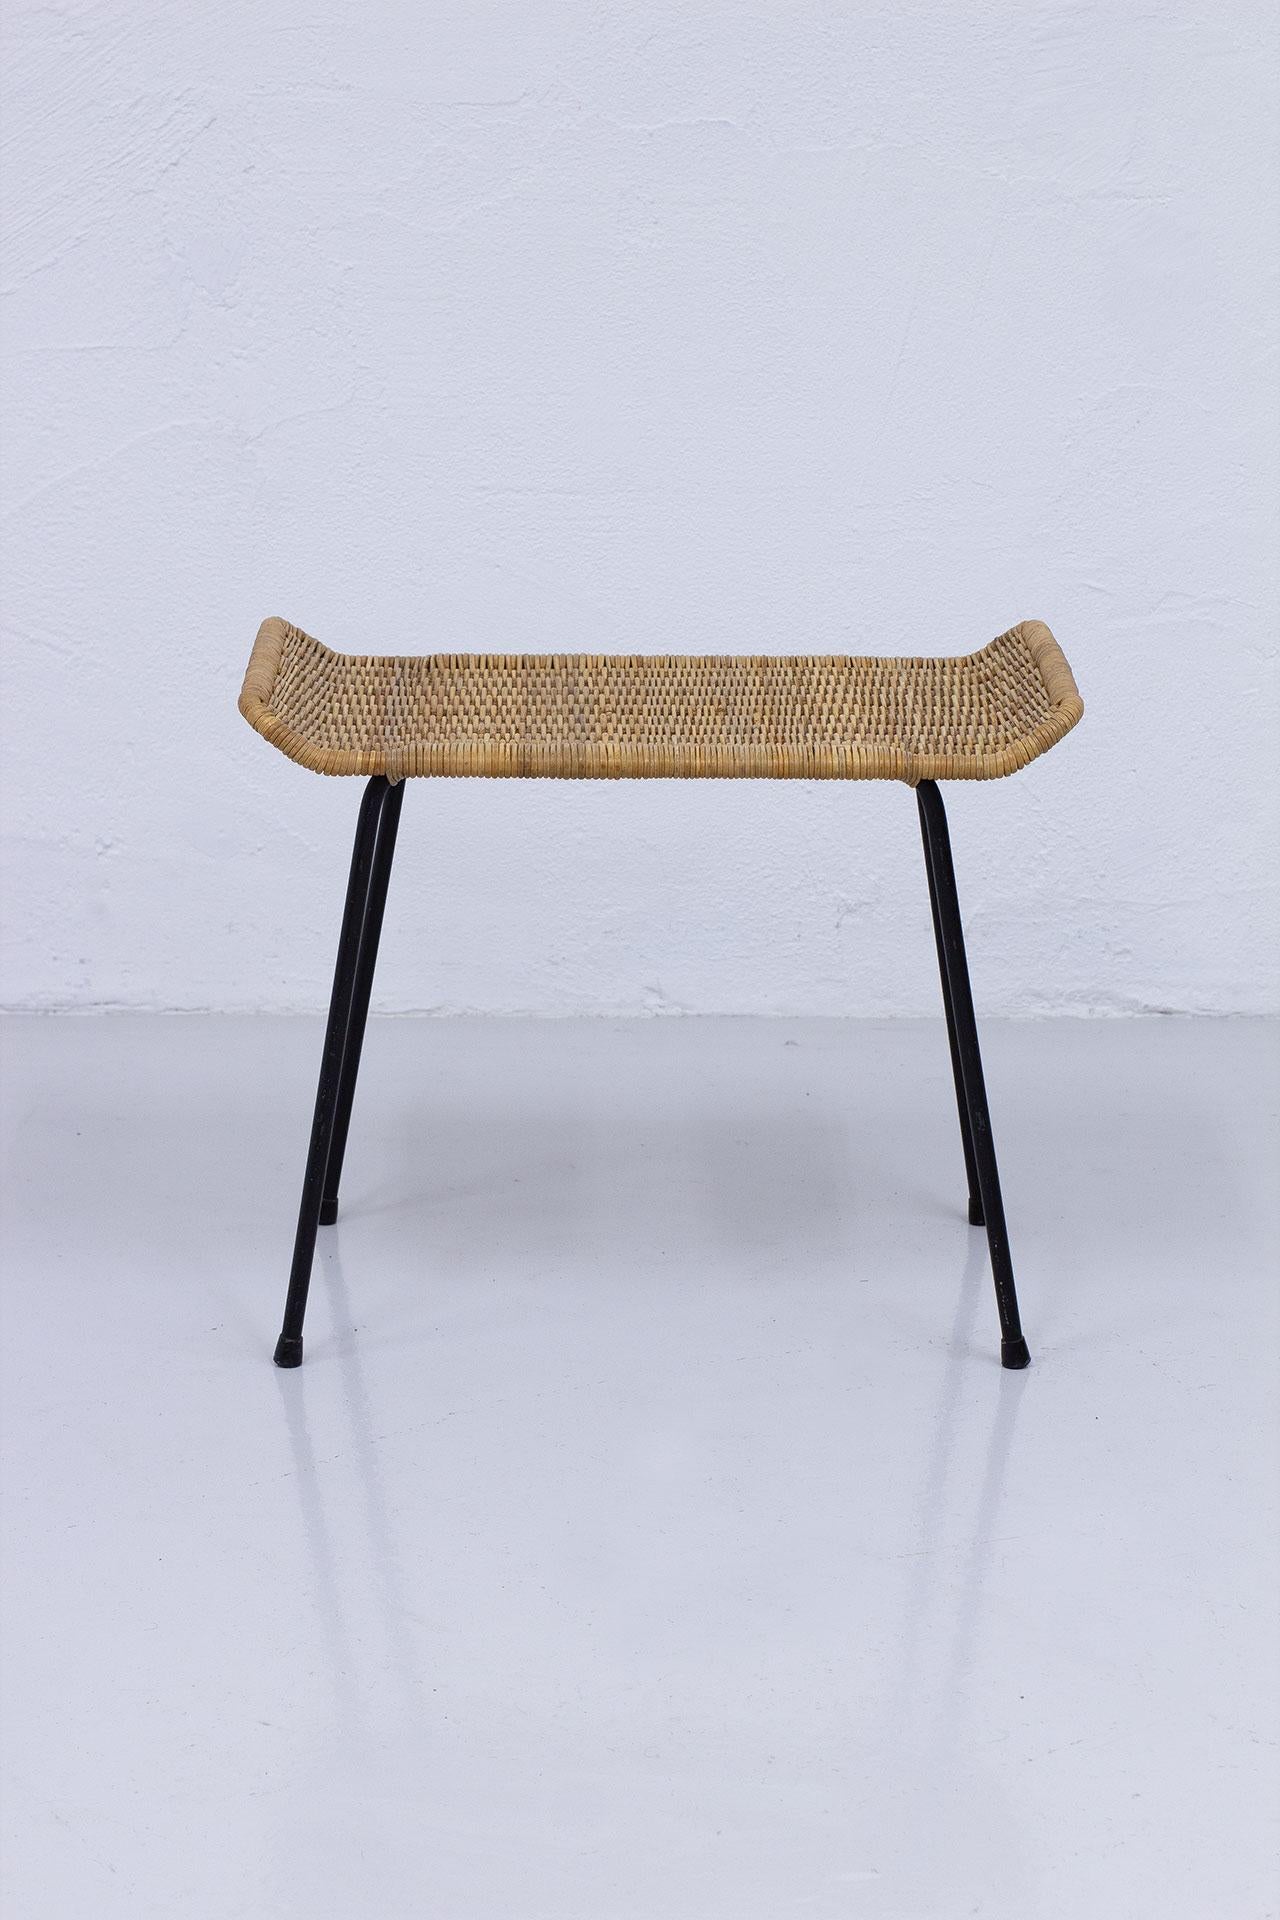 Wicker Stool by Gian franco Legler In Good Condition For Sale In Stockholm, SE